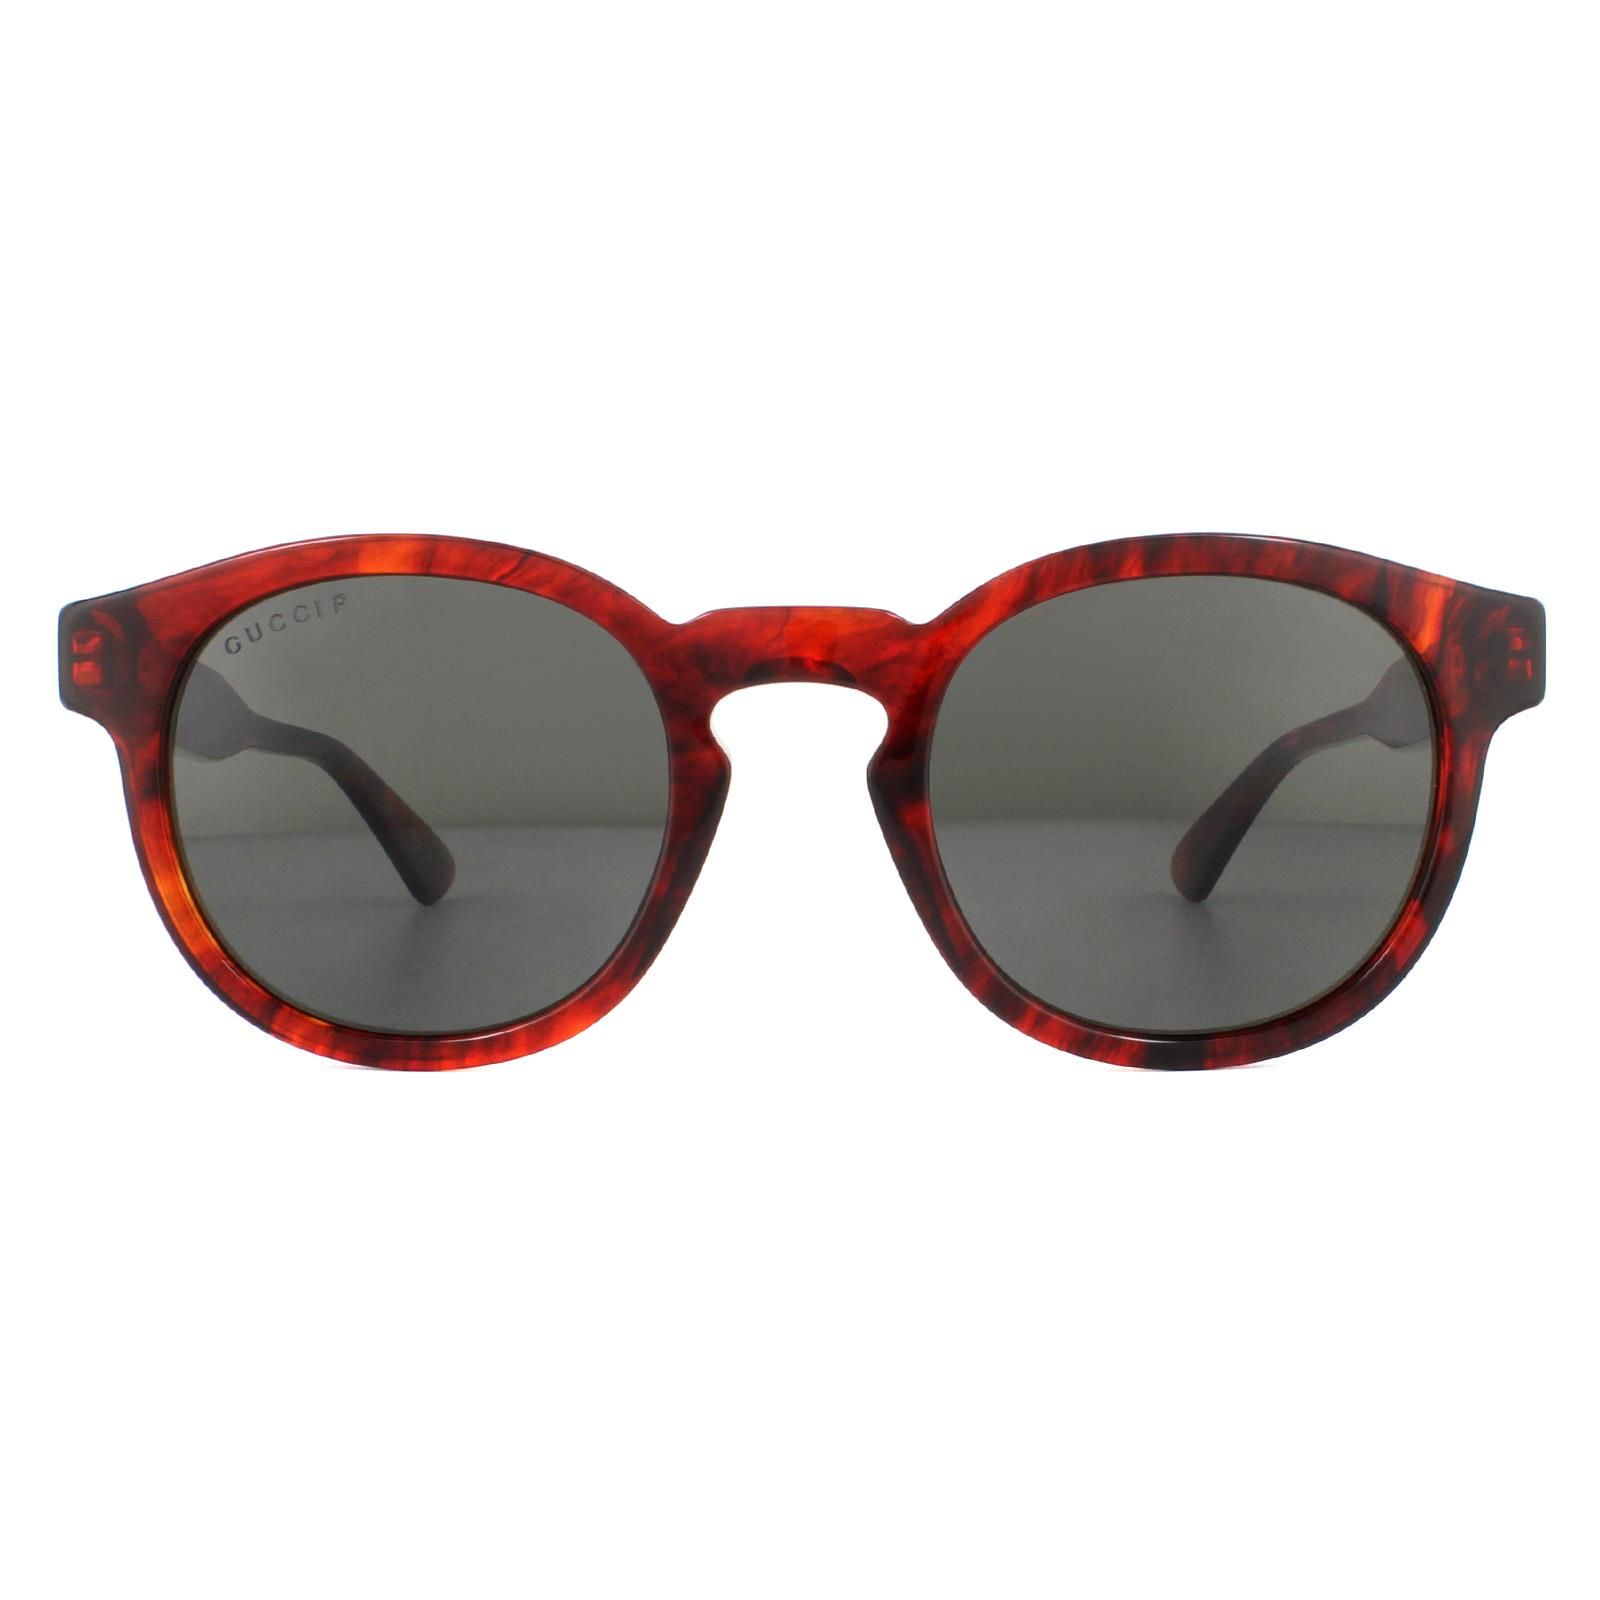 Gucci Sunglasses GG0825S 005 Havana Grey Polarized are a simple round style crafted from lightweight acetate. They feature a keyhole bridge and thin temple tips for a comfortable fit. To finish the look the Gucci brand features on the  temples for authenticity.